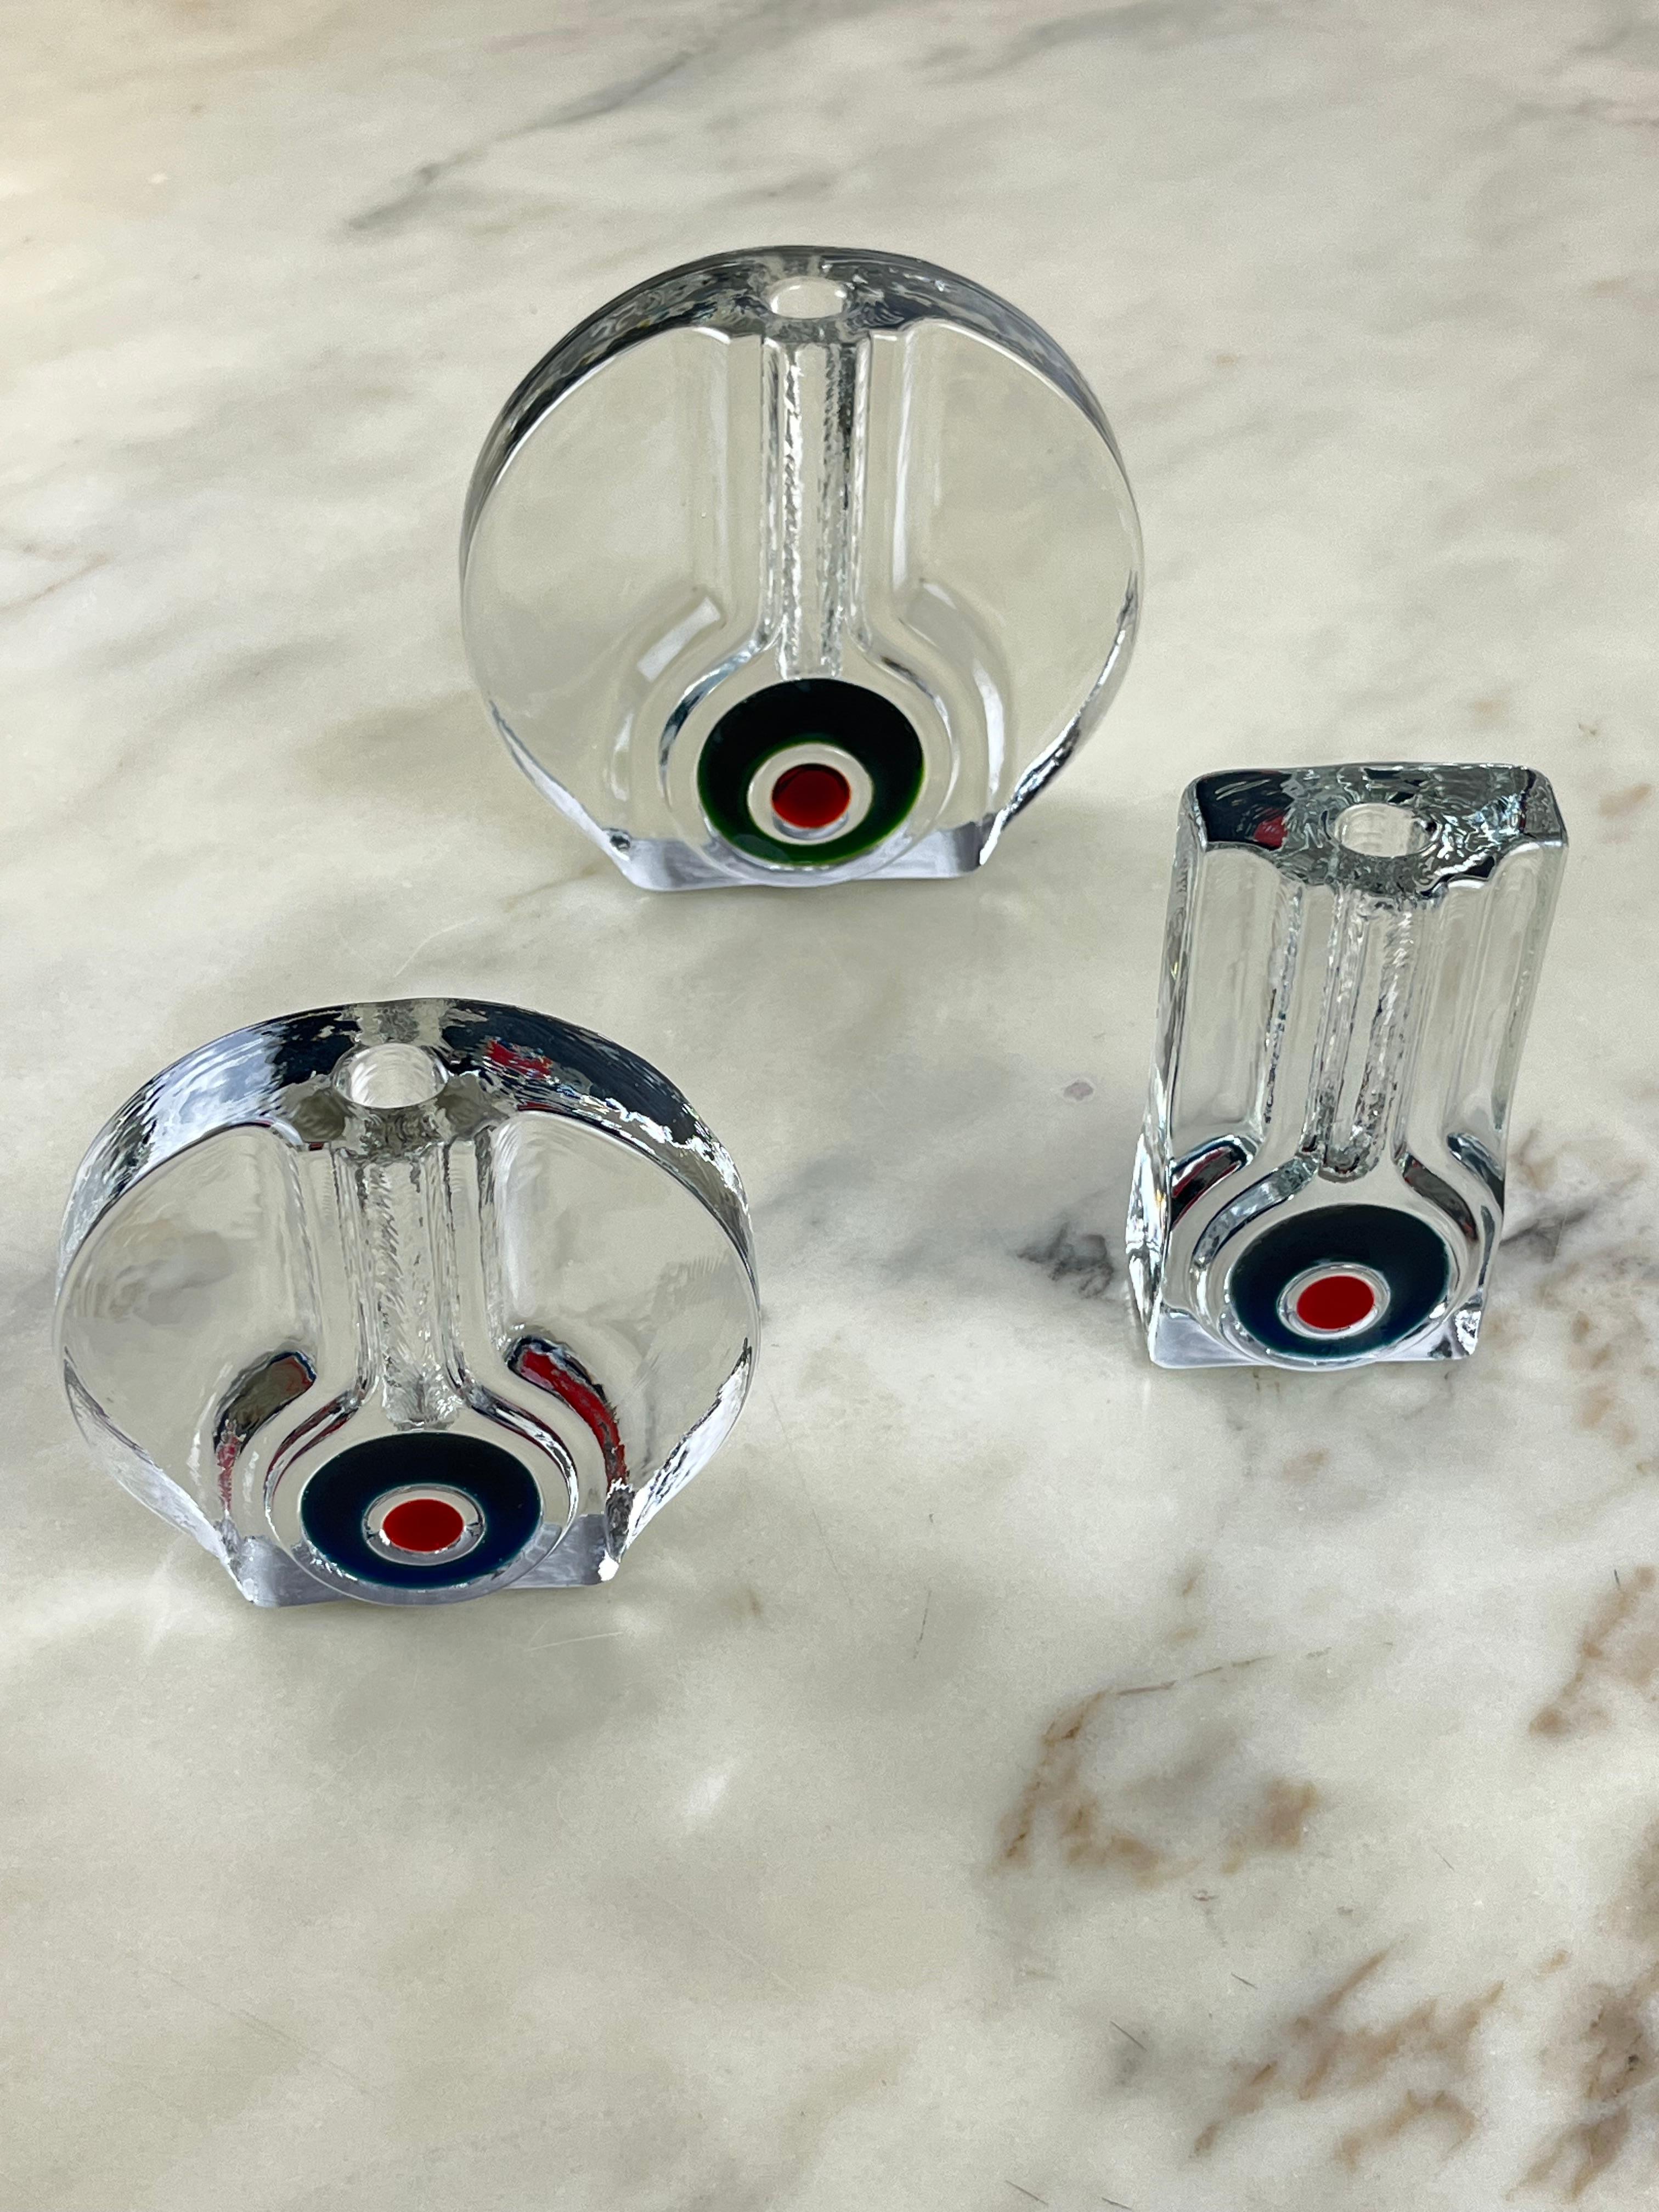 Set of 3 Mid-Century Murano glass single-flower vases from the 1960s
Intact and in good condition, small signs of aging.